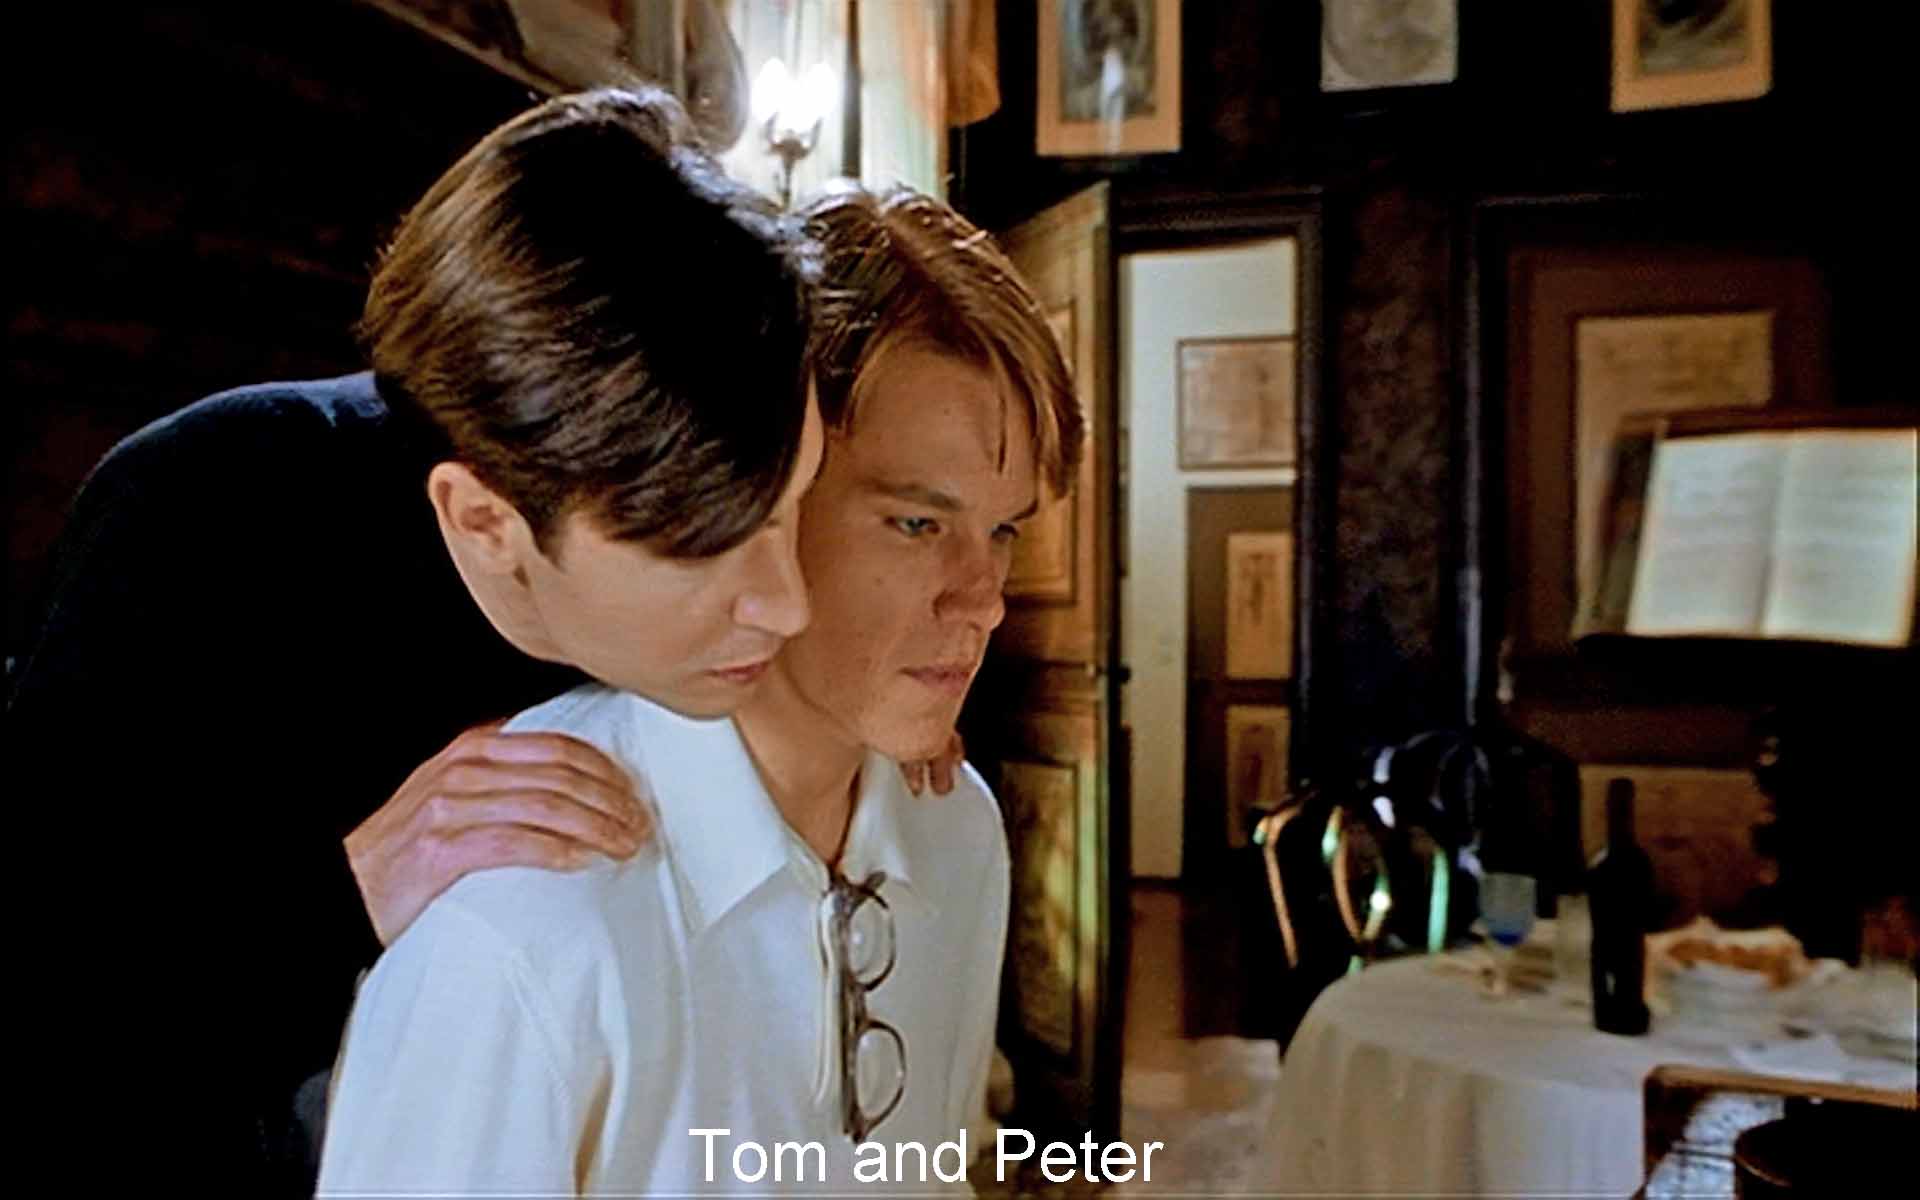 Tom and Peter